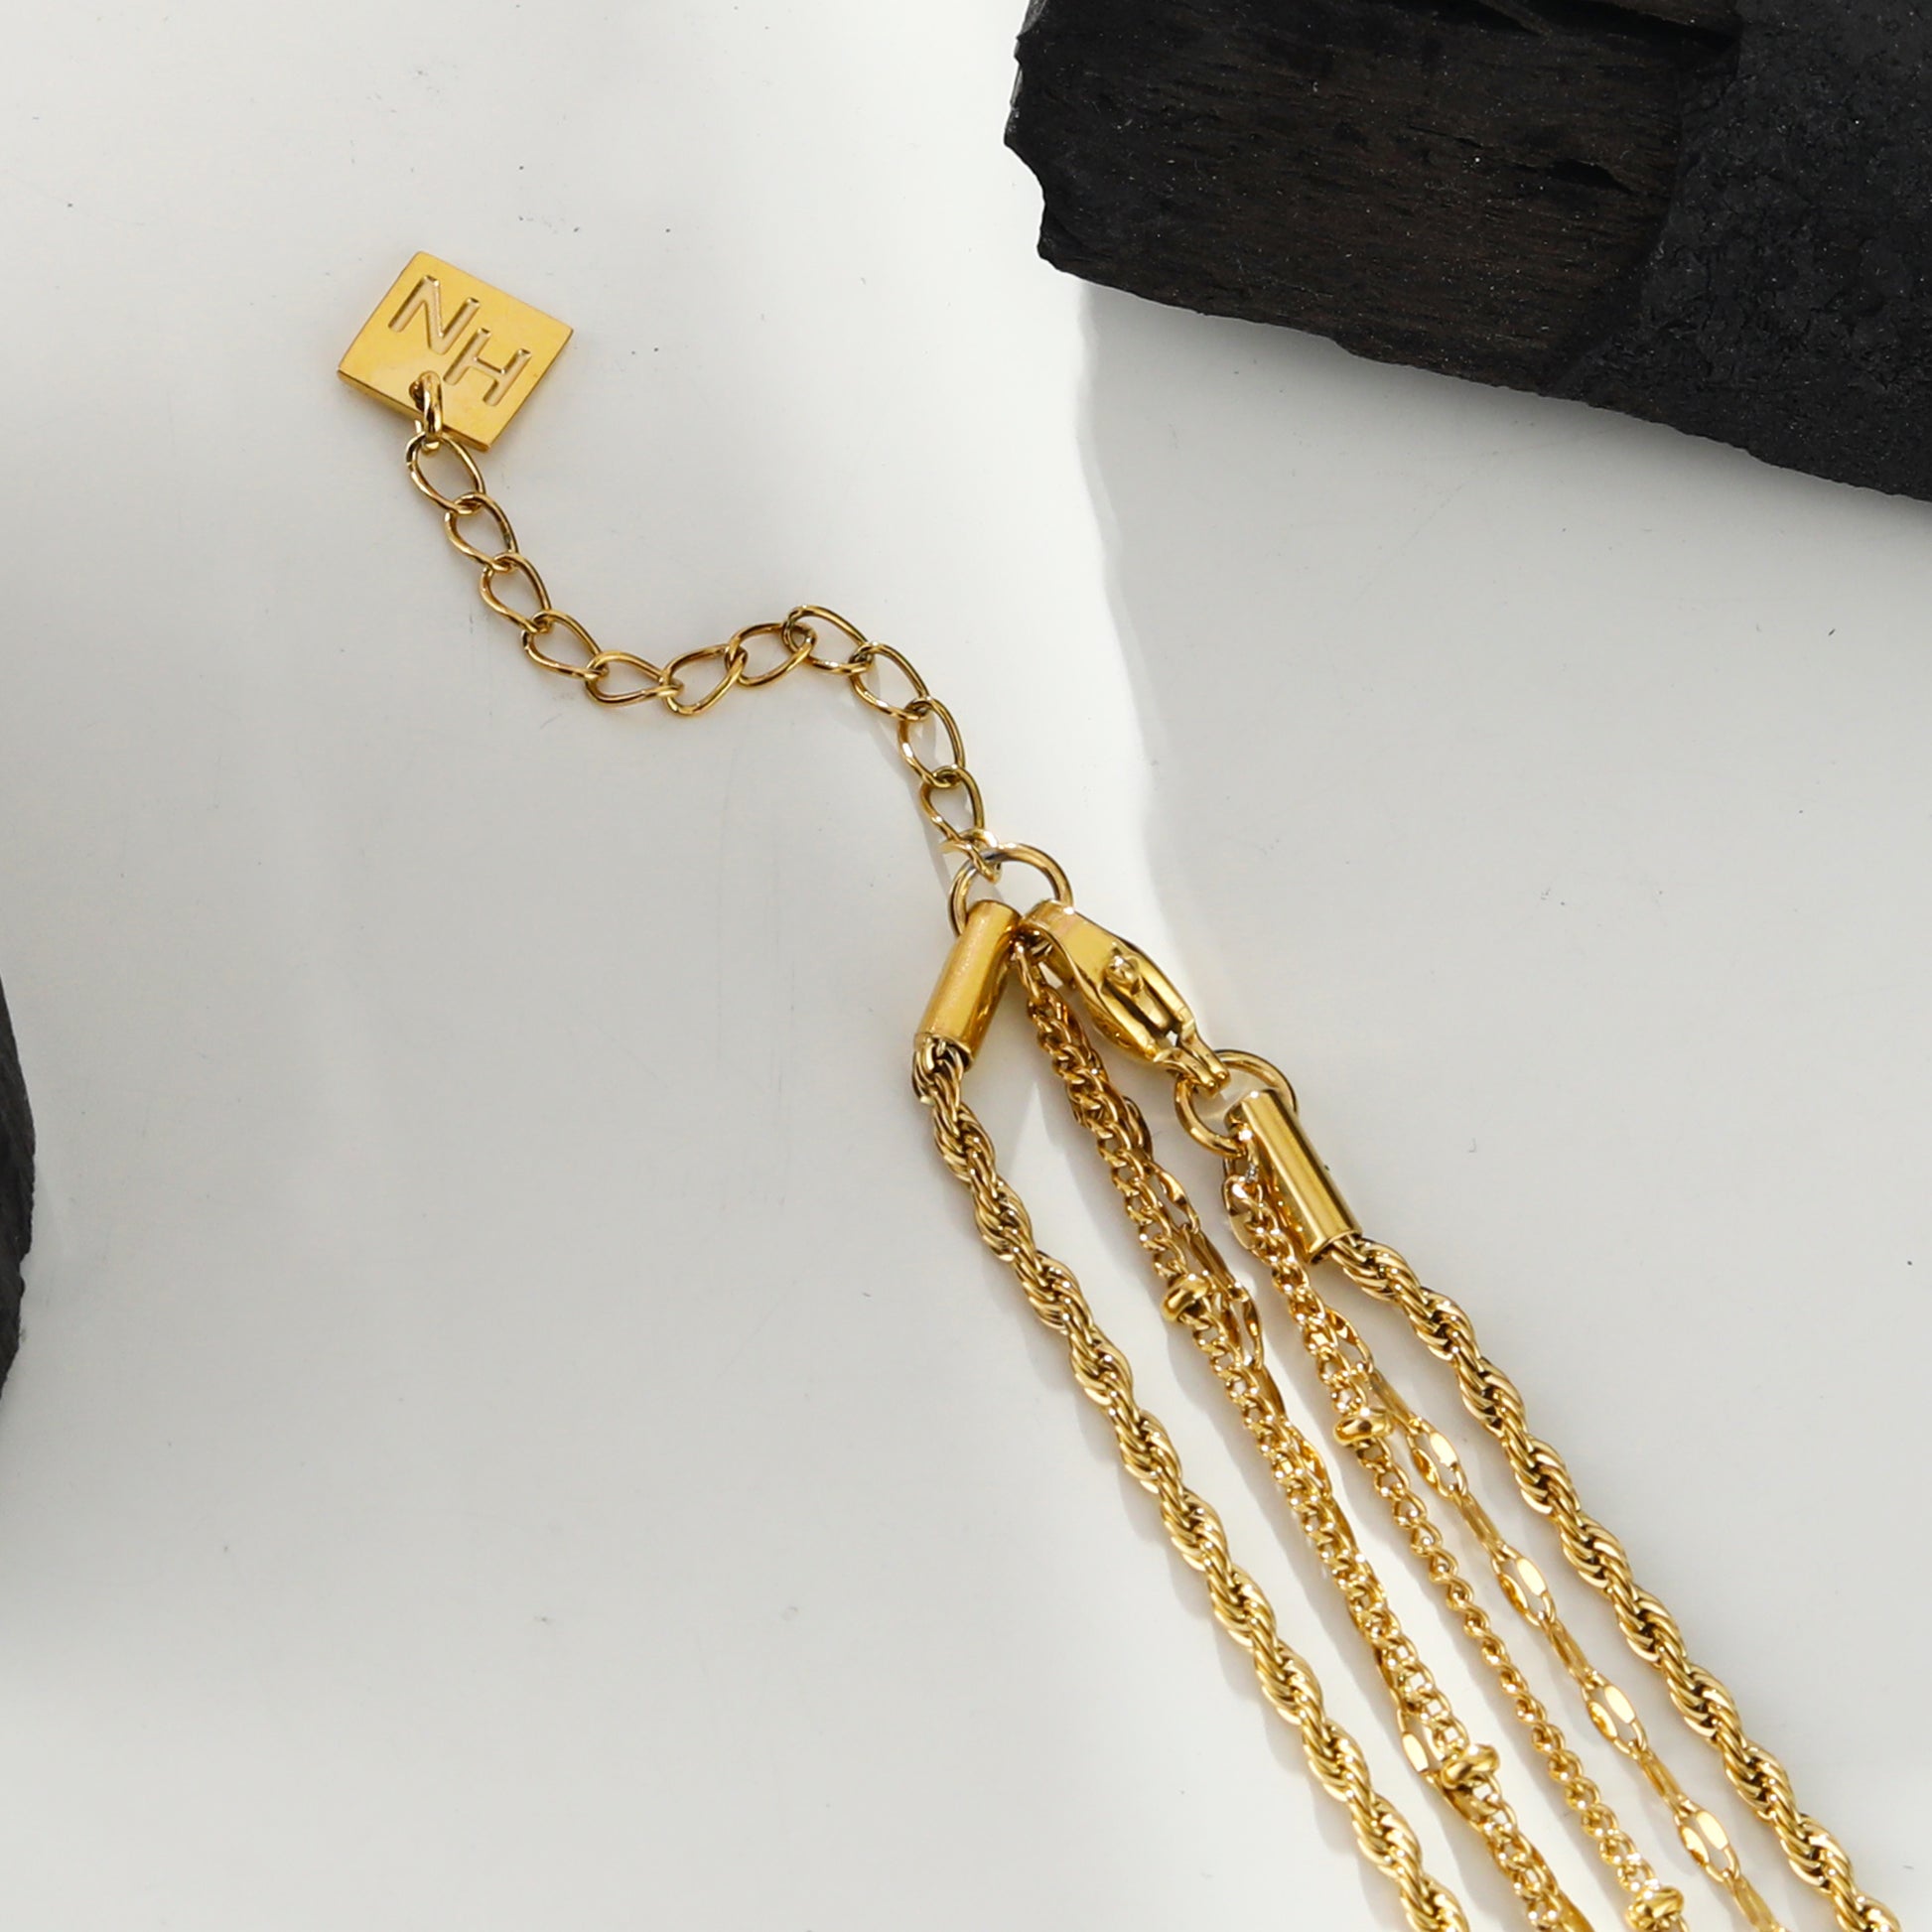 hackney-nine | hackneynine | necklace | layered-necklace | layered-chain-necklace | jewellery | jewellery-store | shop-jewelry | gold-jewellery | silver-jewellery | dressy_jewellery | classy_ jewellery | on_trend_jewellery | fashion_ jewellery | cool_jewellery | affordable_jewellery | designer_jewellery | vintage_jeweler | gifts-for-her | gifts-for-mum | gifts-for-girls | gifts-for-females